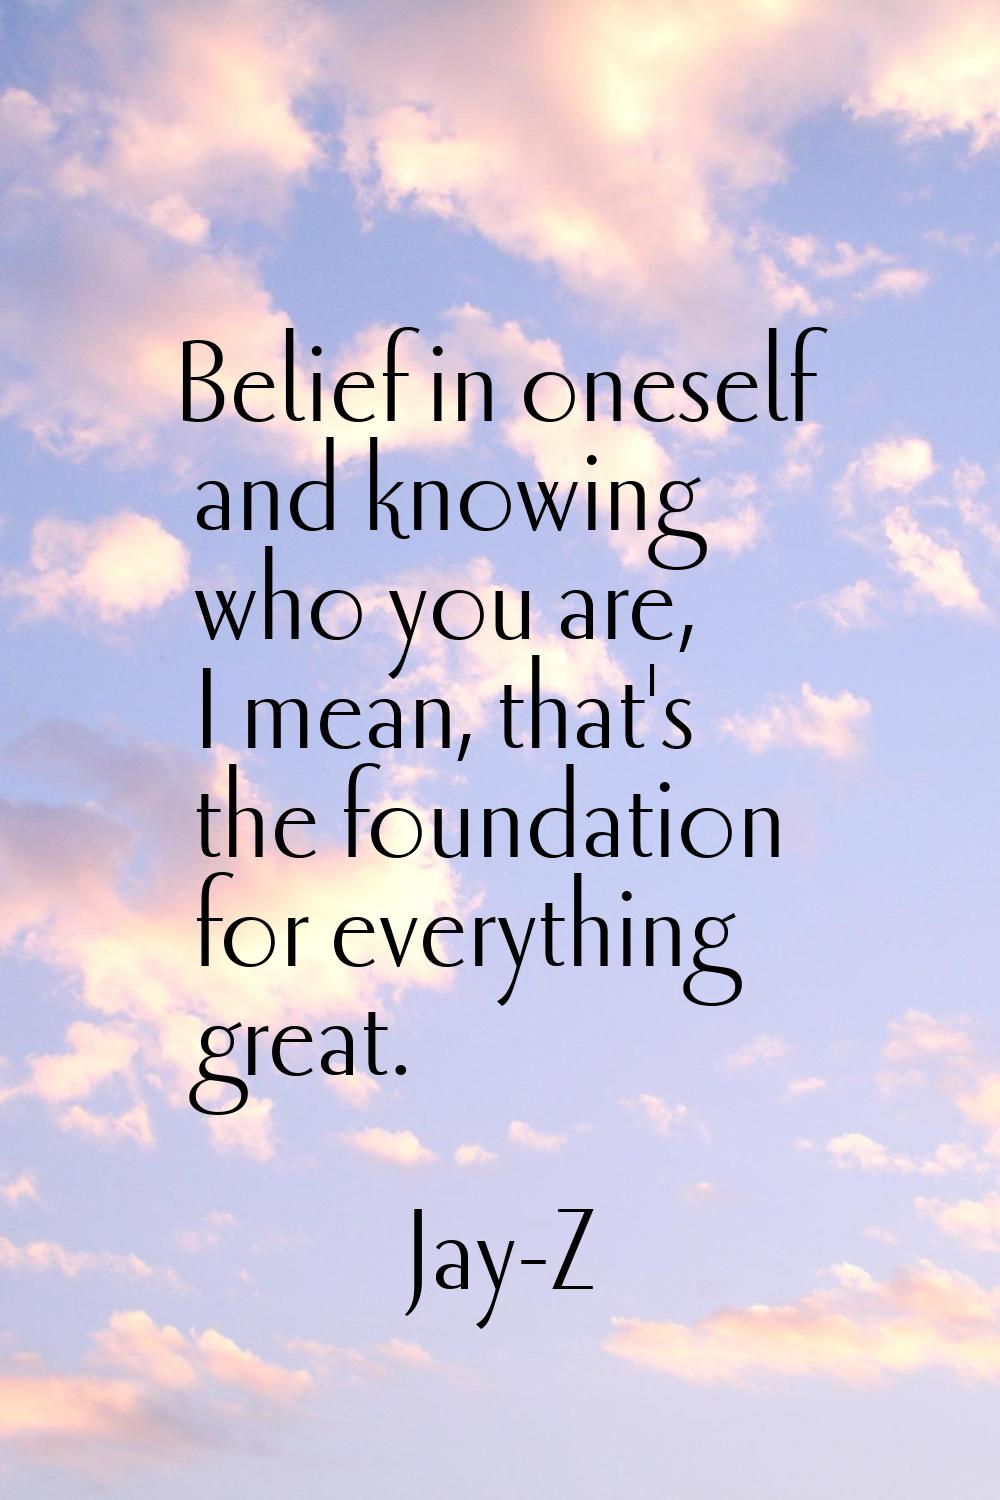 Belief in oneself and knowing who you are, I mean, that's the foundation for everything great.